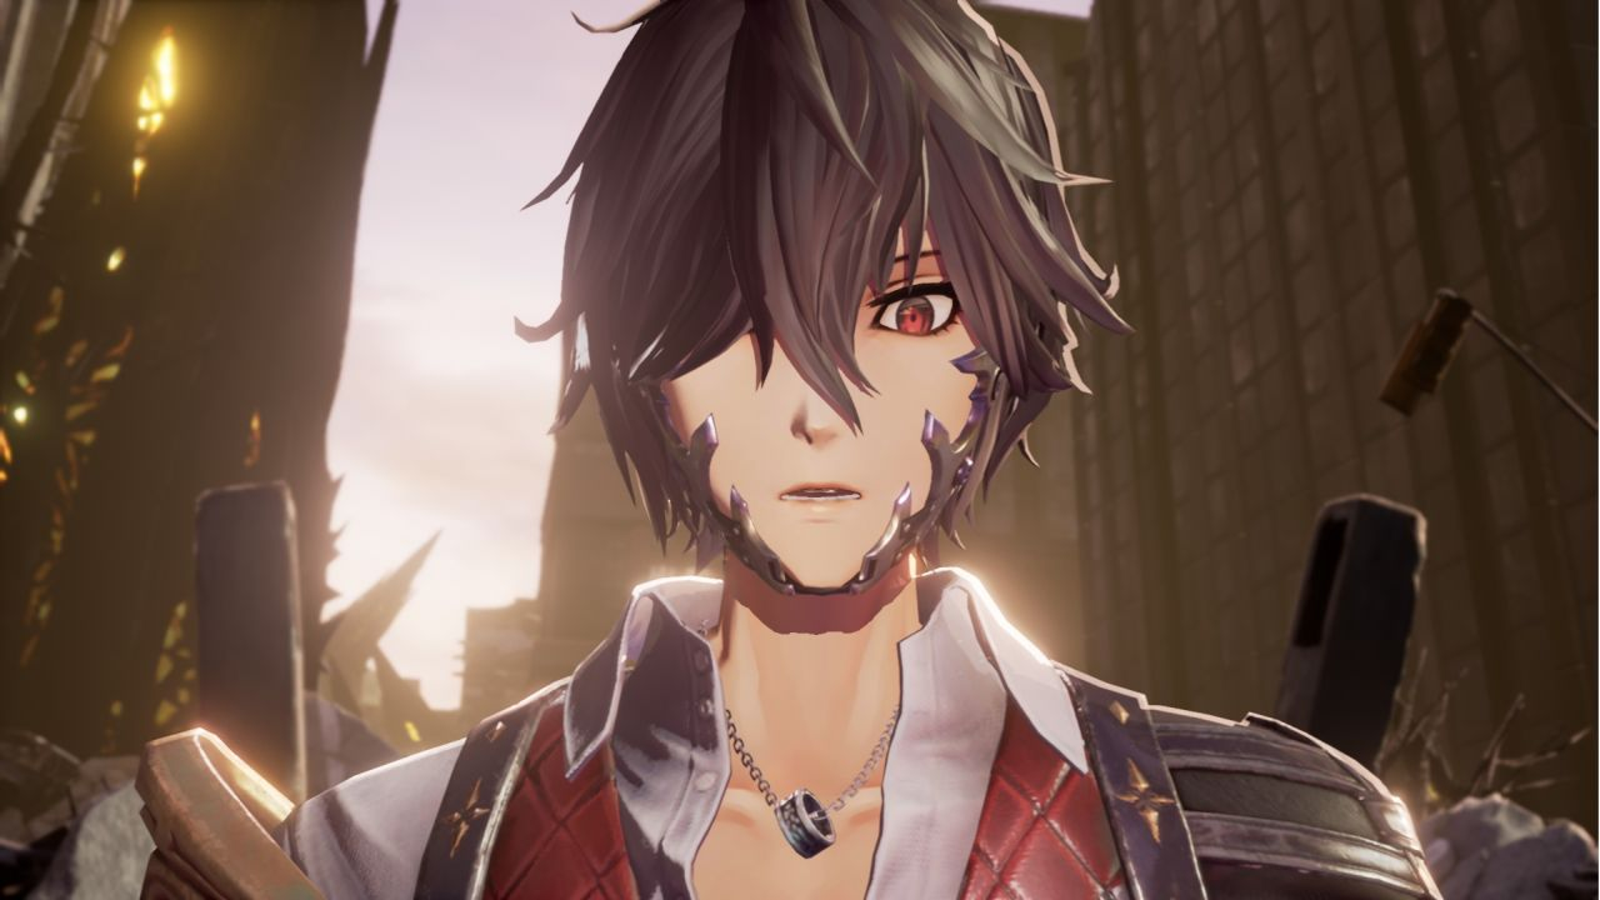 Code Vein Shows Off The Anime- Style Action With New ScreensVideo